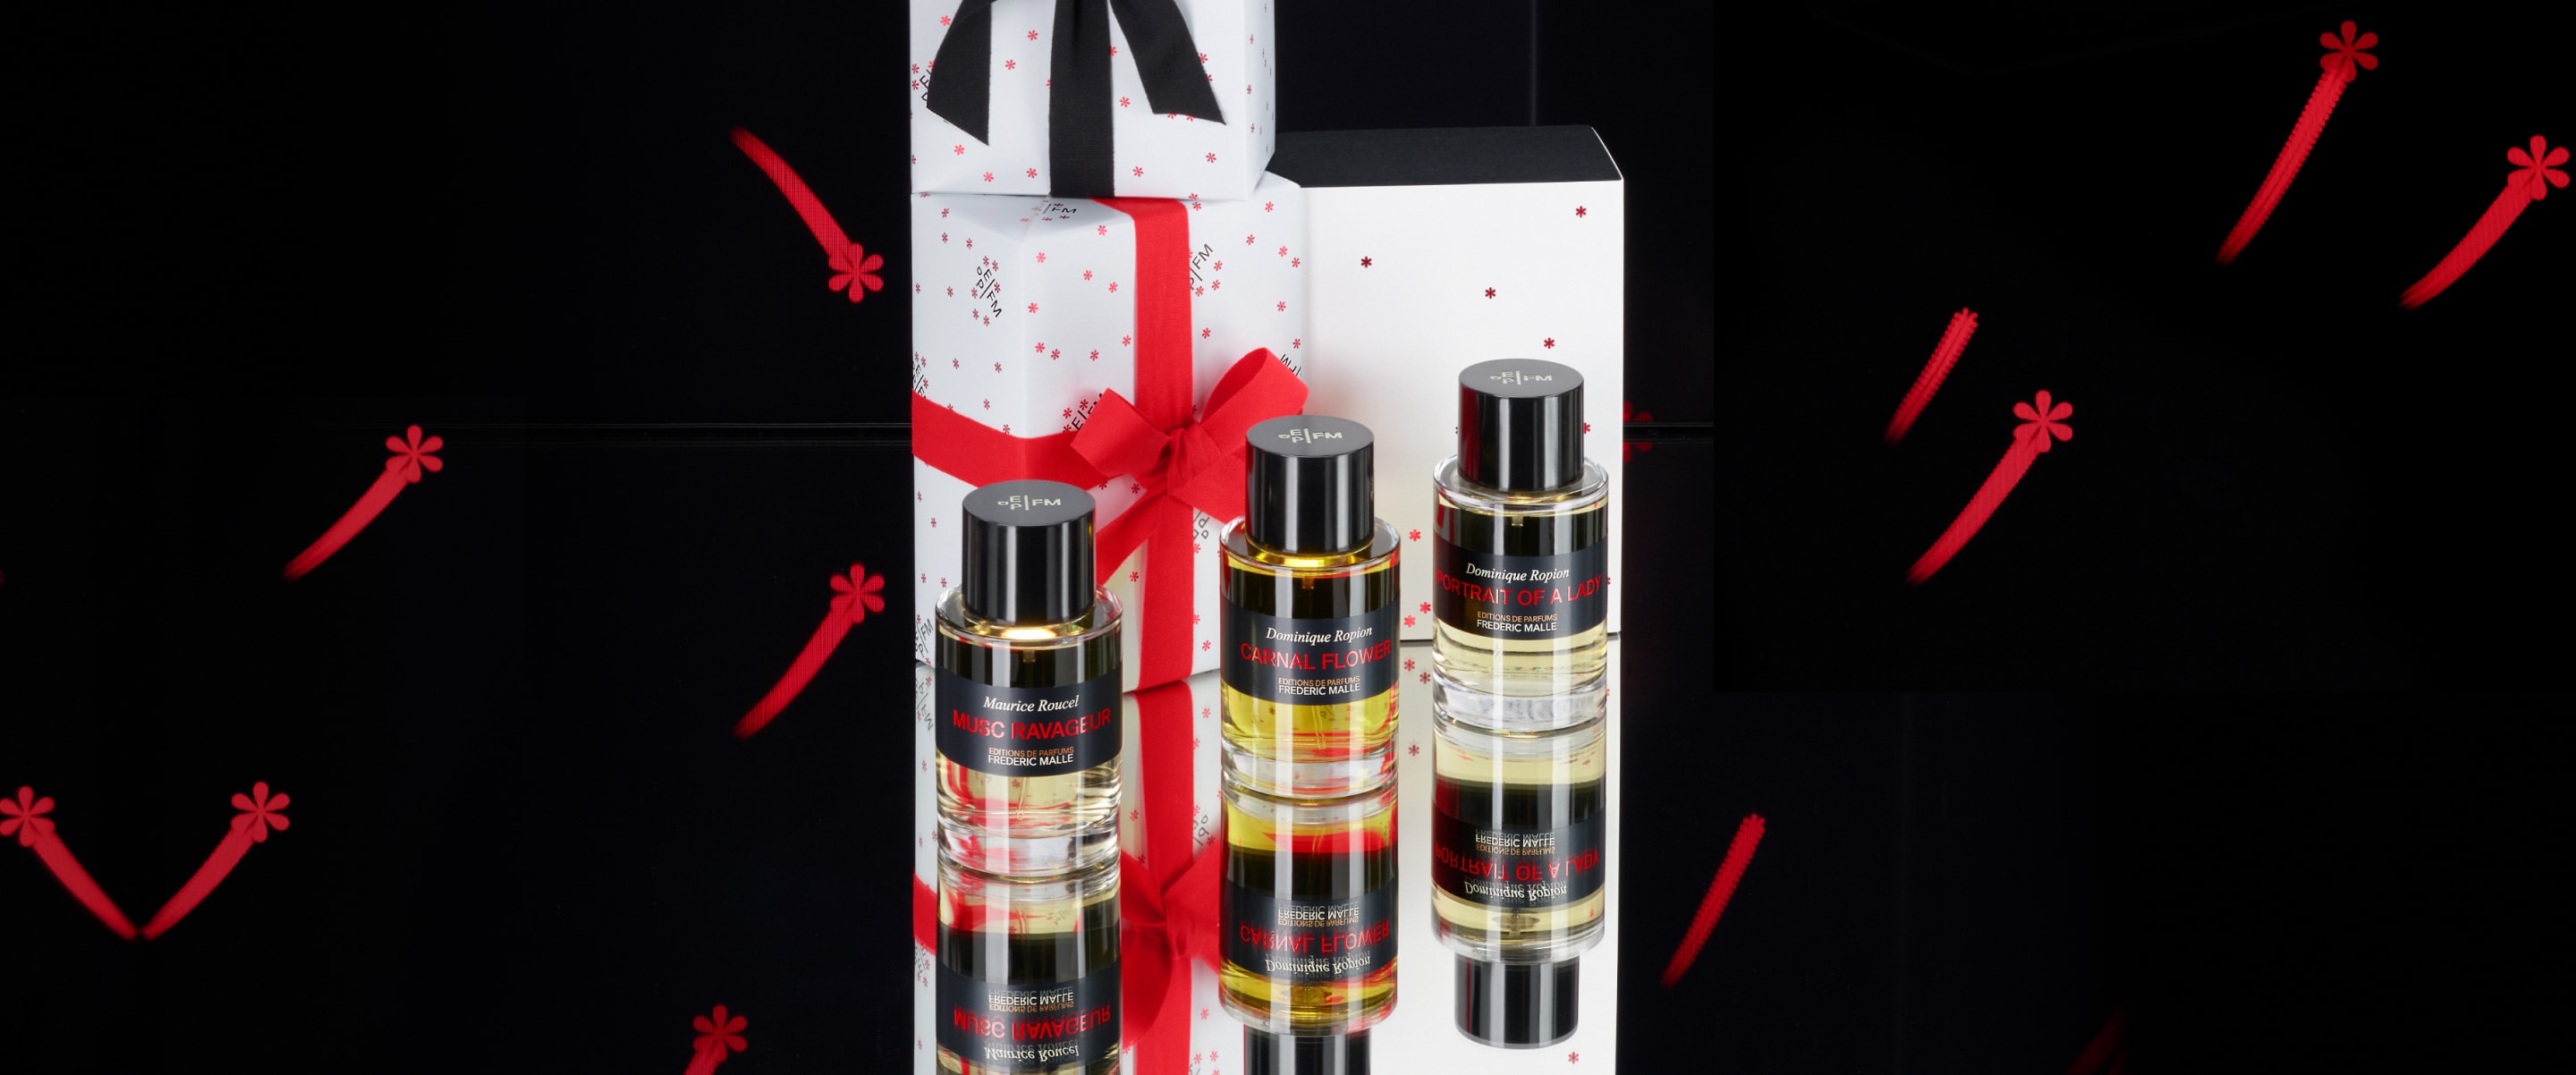 Frederic Malle Official Site